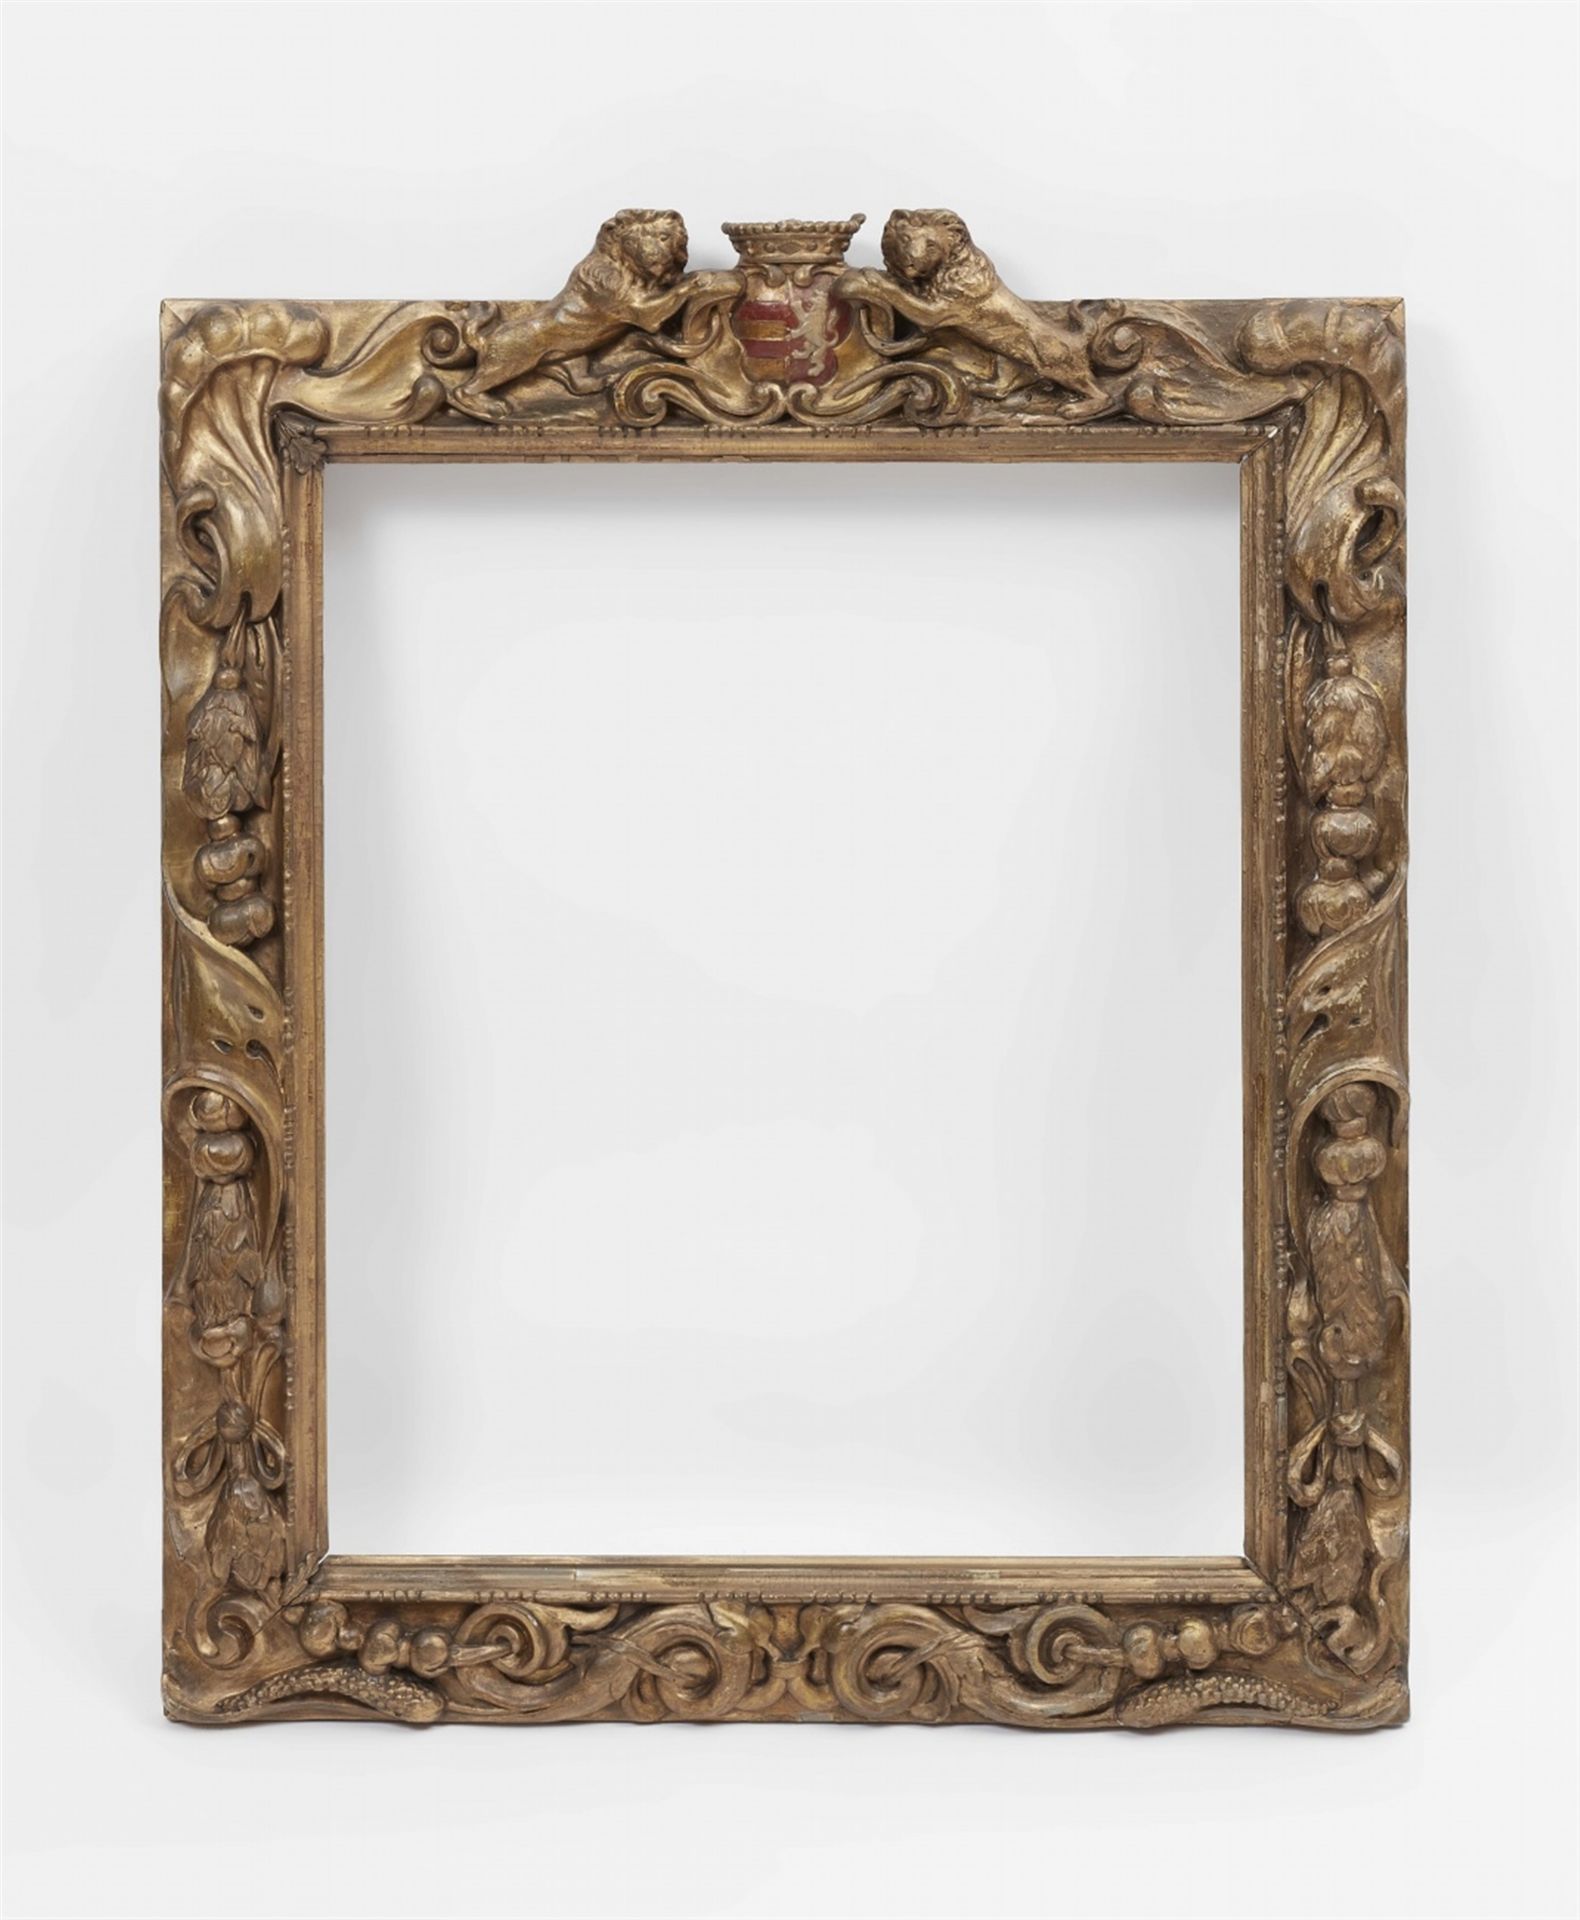 A carved Flemish frame with coat of arms